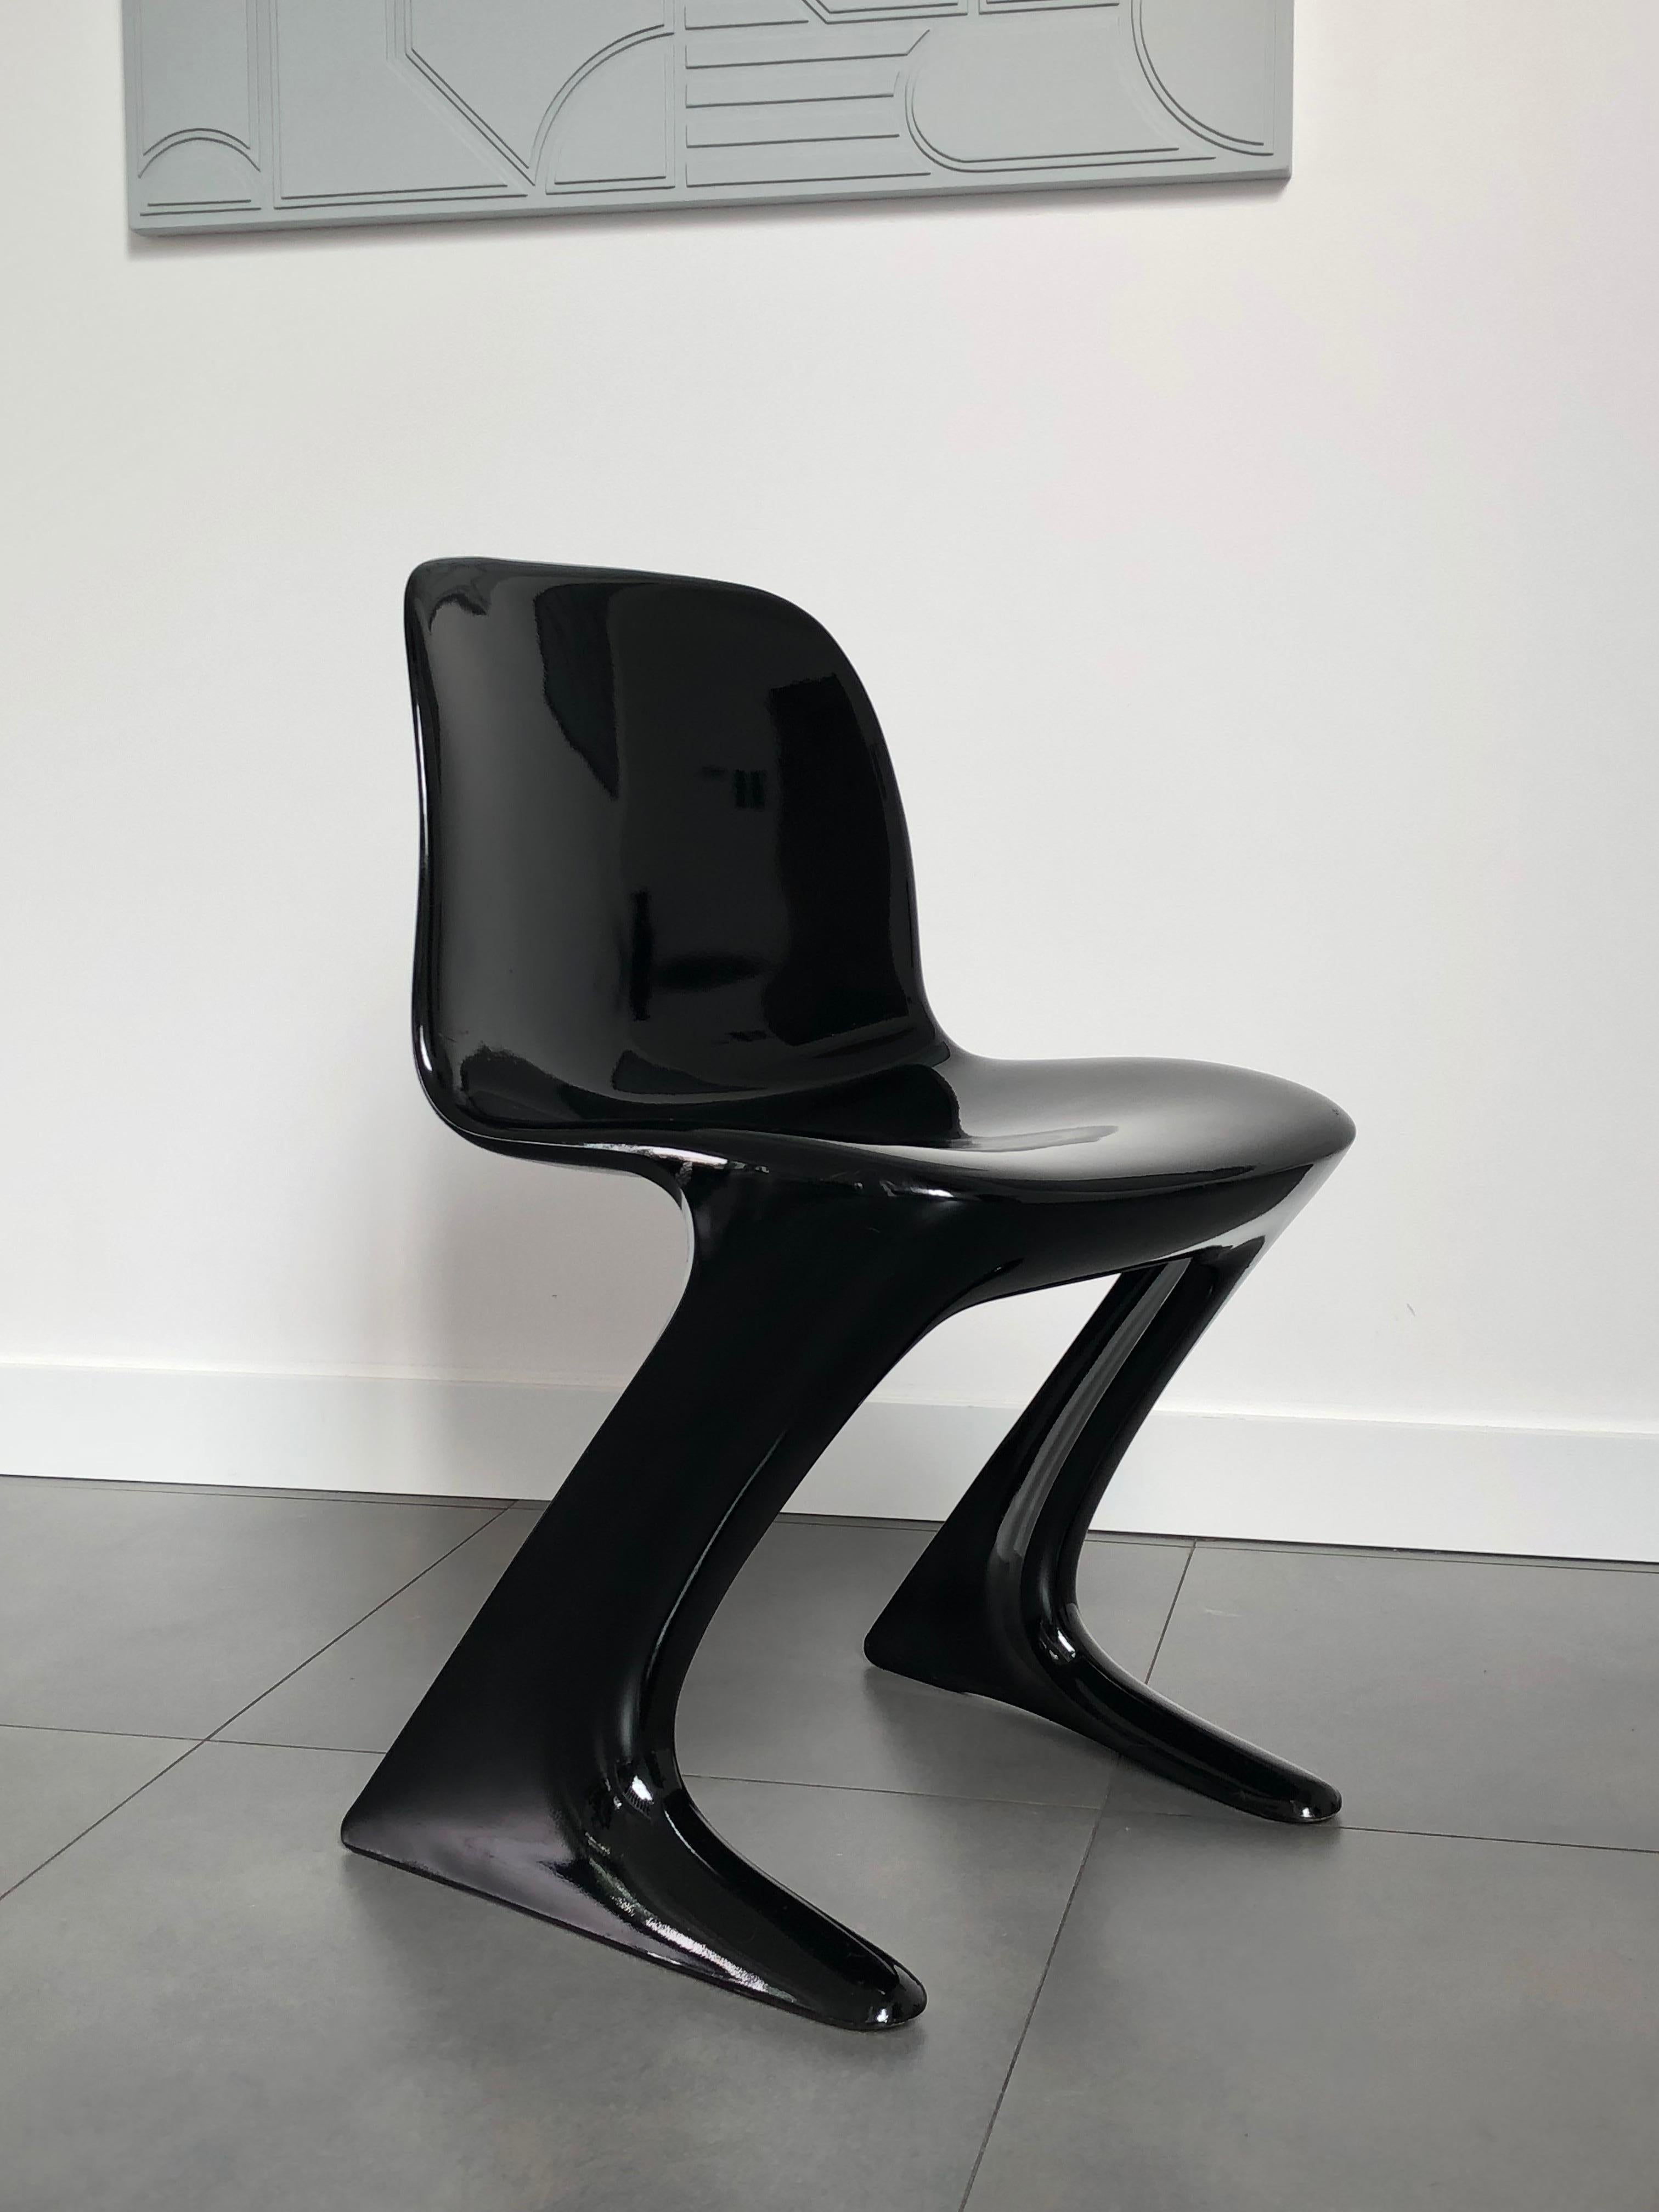 This set is called Z-chair. Designed in 1968 in the GDR by Ernst Moeckl and Siegfried Mehl, German Version of the Panton chair. Also called kangoroo chair or variopur chair. Produced in eastern Germany.

Chairs are after renovation - new glossy